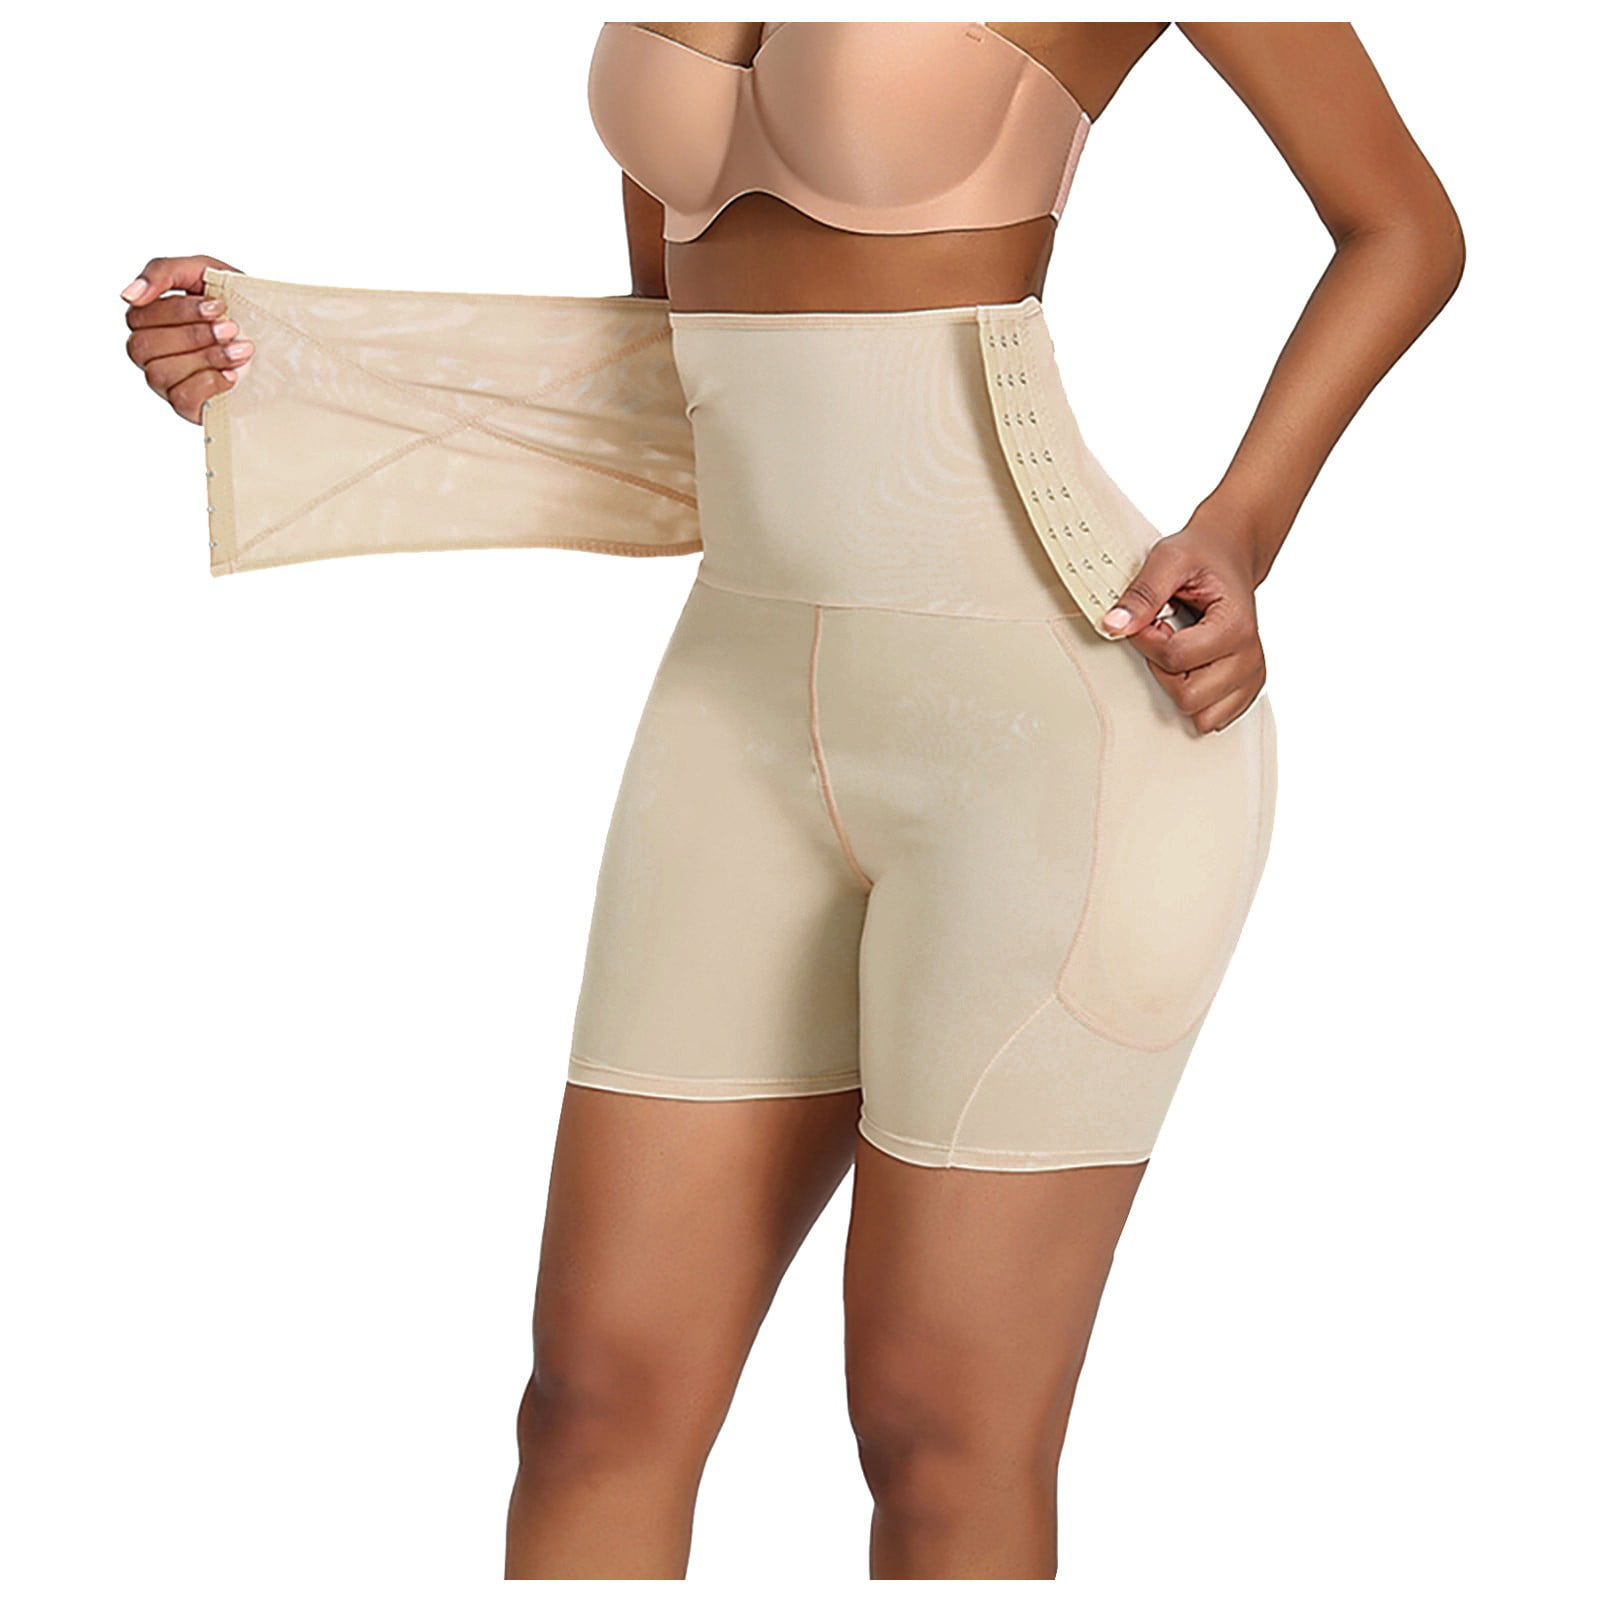 Zip-up Spanx After Delivery, High Waist, Buttock, Body Toning Spanx,  Women's Plus-size Spanx - AliExpress